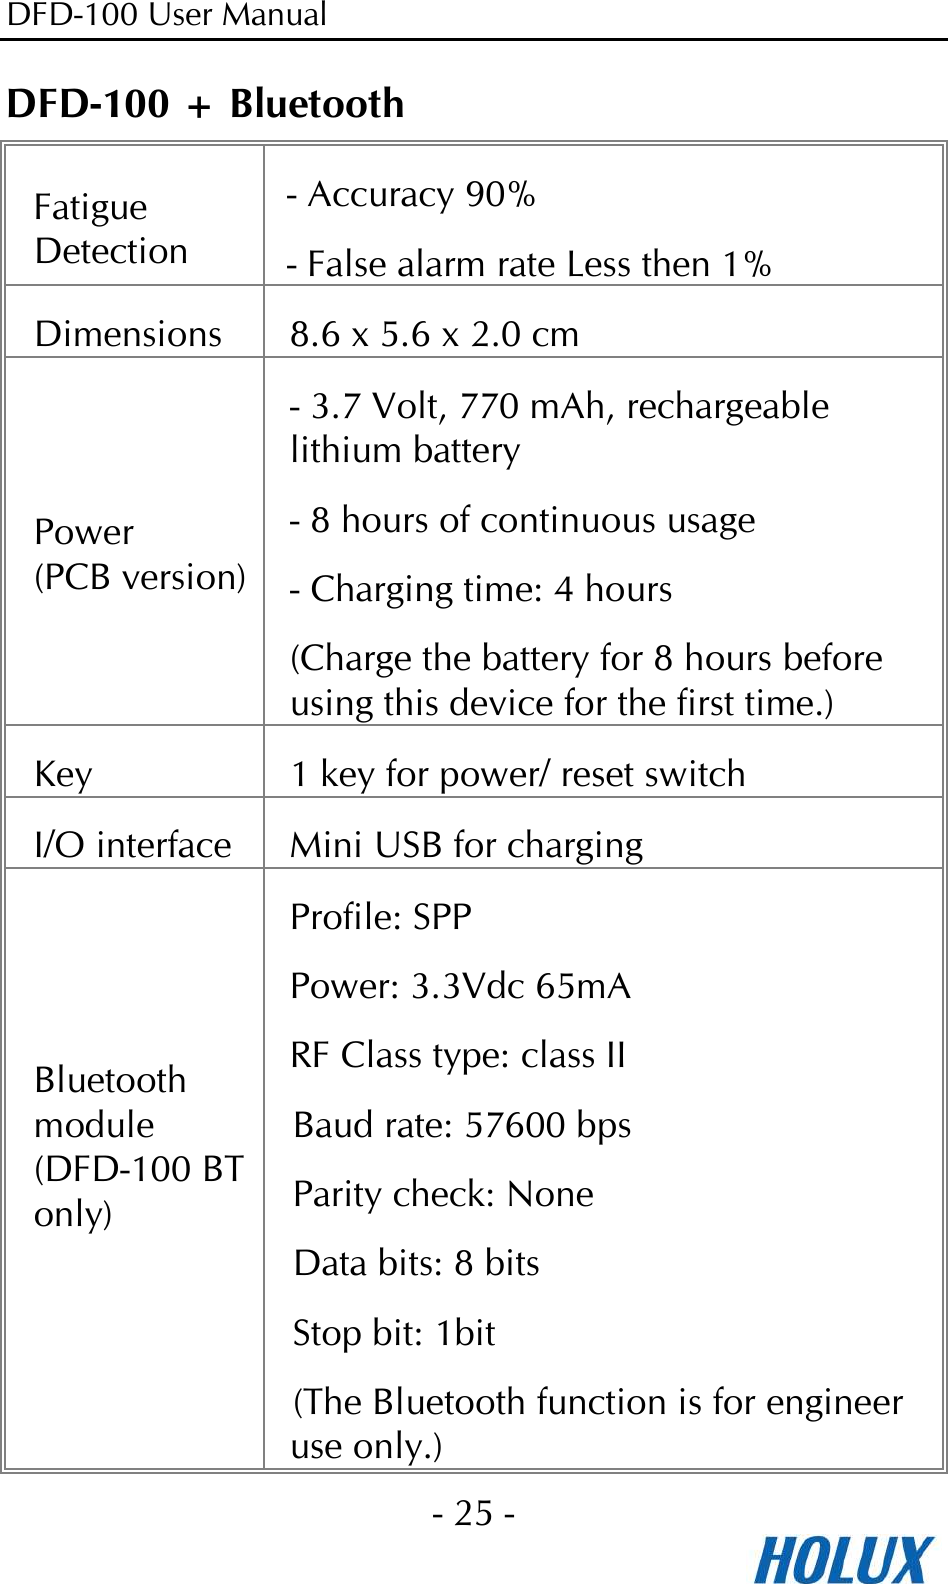 DFD-100 User Manual - 25 -  DFD-100 + Bluetooth Fatigue Detection - Accuracy 90% - False alarm rate Less then 1% Dimensions 8.6 x 5.6 x 2.0 cm Power   (PCB version) - 3.7 Volt, 770 mAh, rechargeable lithium battery - 8 hours of continuous usage - Charging time: 4 hours (Charge the battery for 8 hours before using this device for the first time.) Key  1 key for power/ reset switch I/O interface Mini USB for charging Bluetooth module (DFD-100 BT only)  Profile: SPP Power: 3.3Vdc 65mA RF Class type: class II Baud rate: 57600 bps Parity check: None Data bits: 8 bits Stop bit: 1bit (The Bluetooth function is for engineer use only.) 